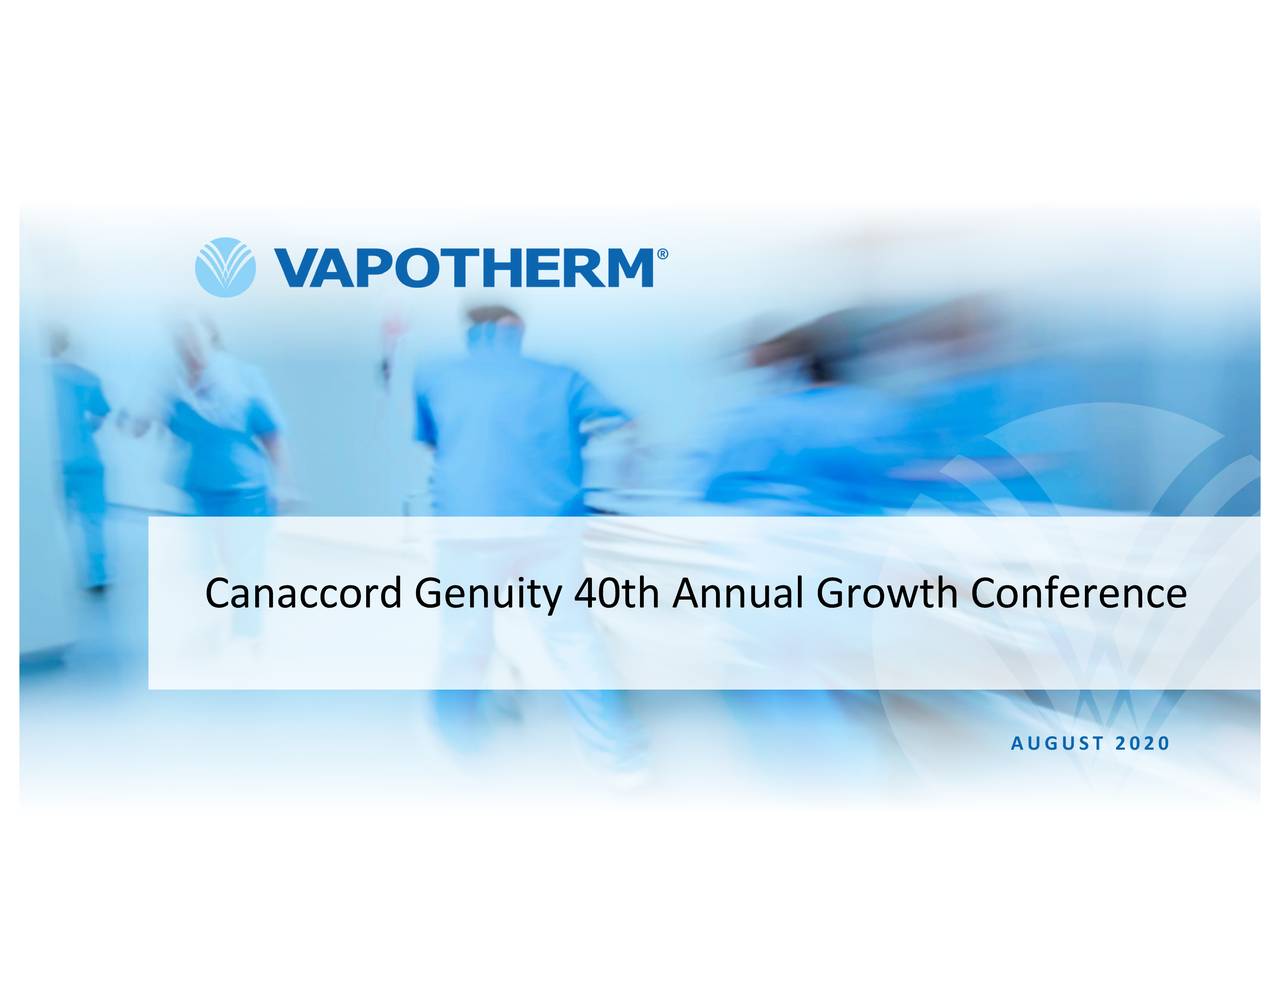 Vapotherm (VAPO) Presents At Canaccord Genuity Growth Conference